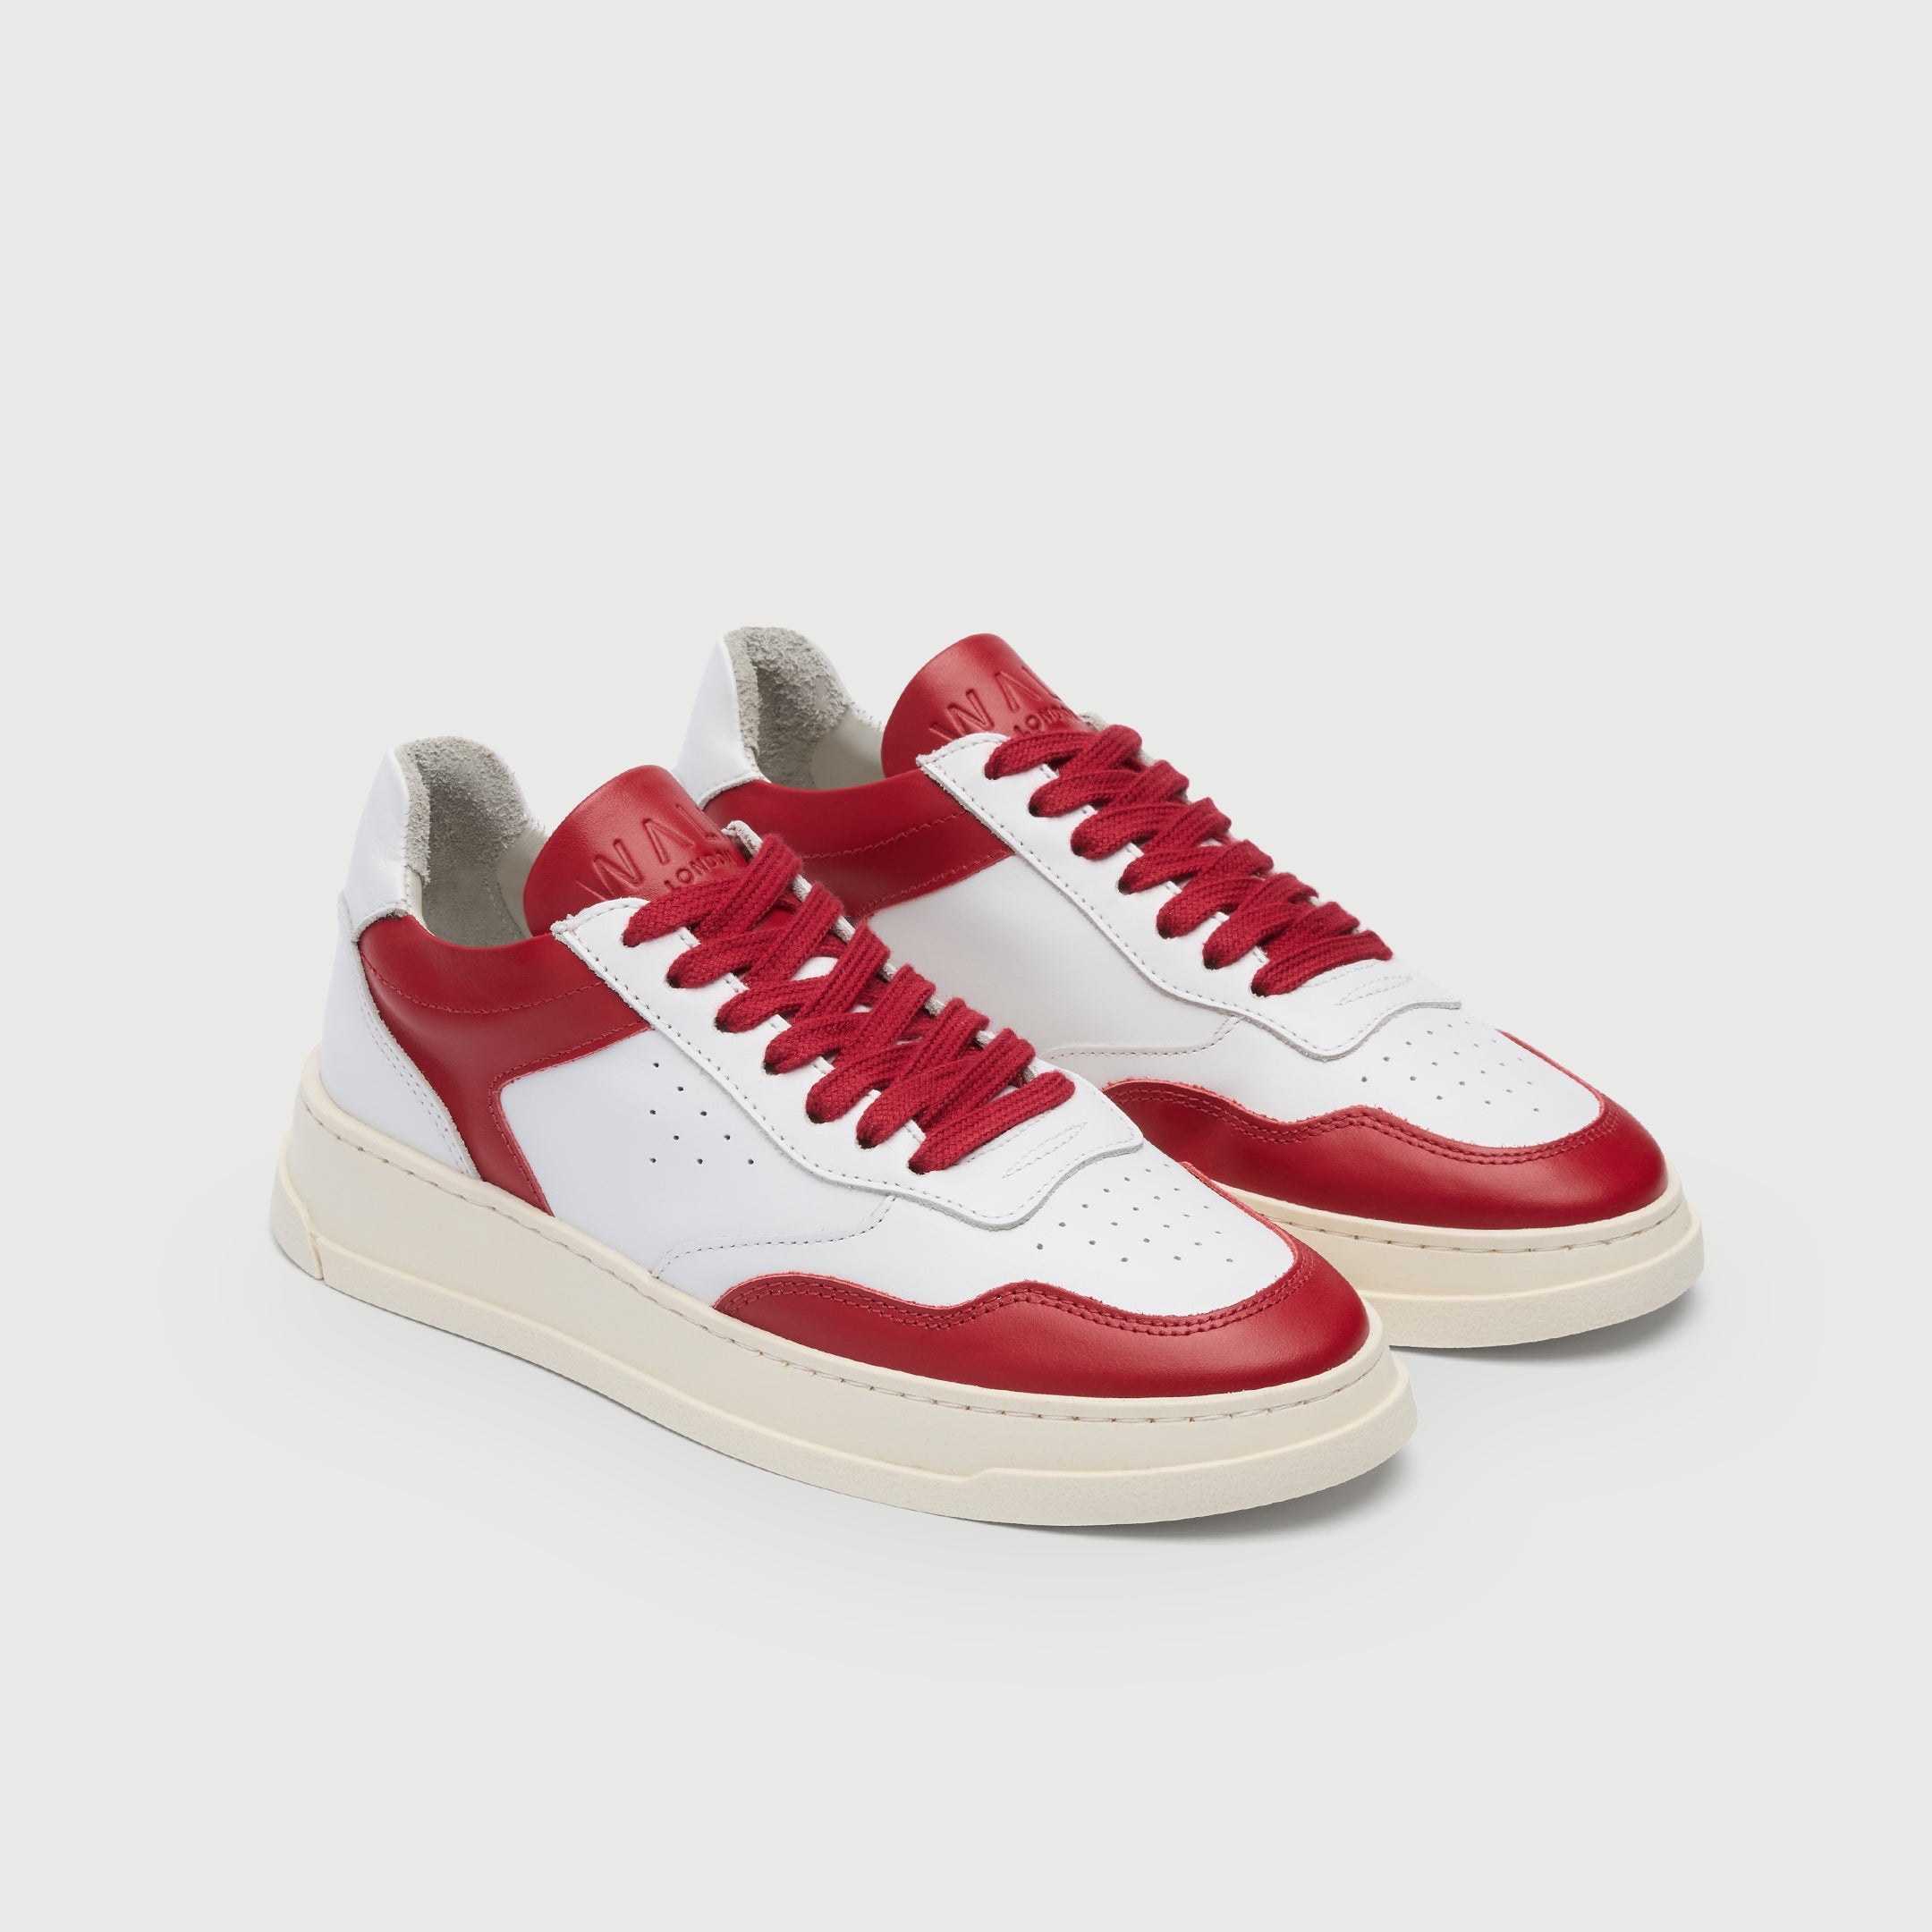 Walk London Womens Santa Rosa Trainer in White and Red Leather